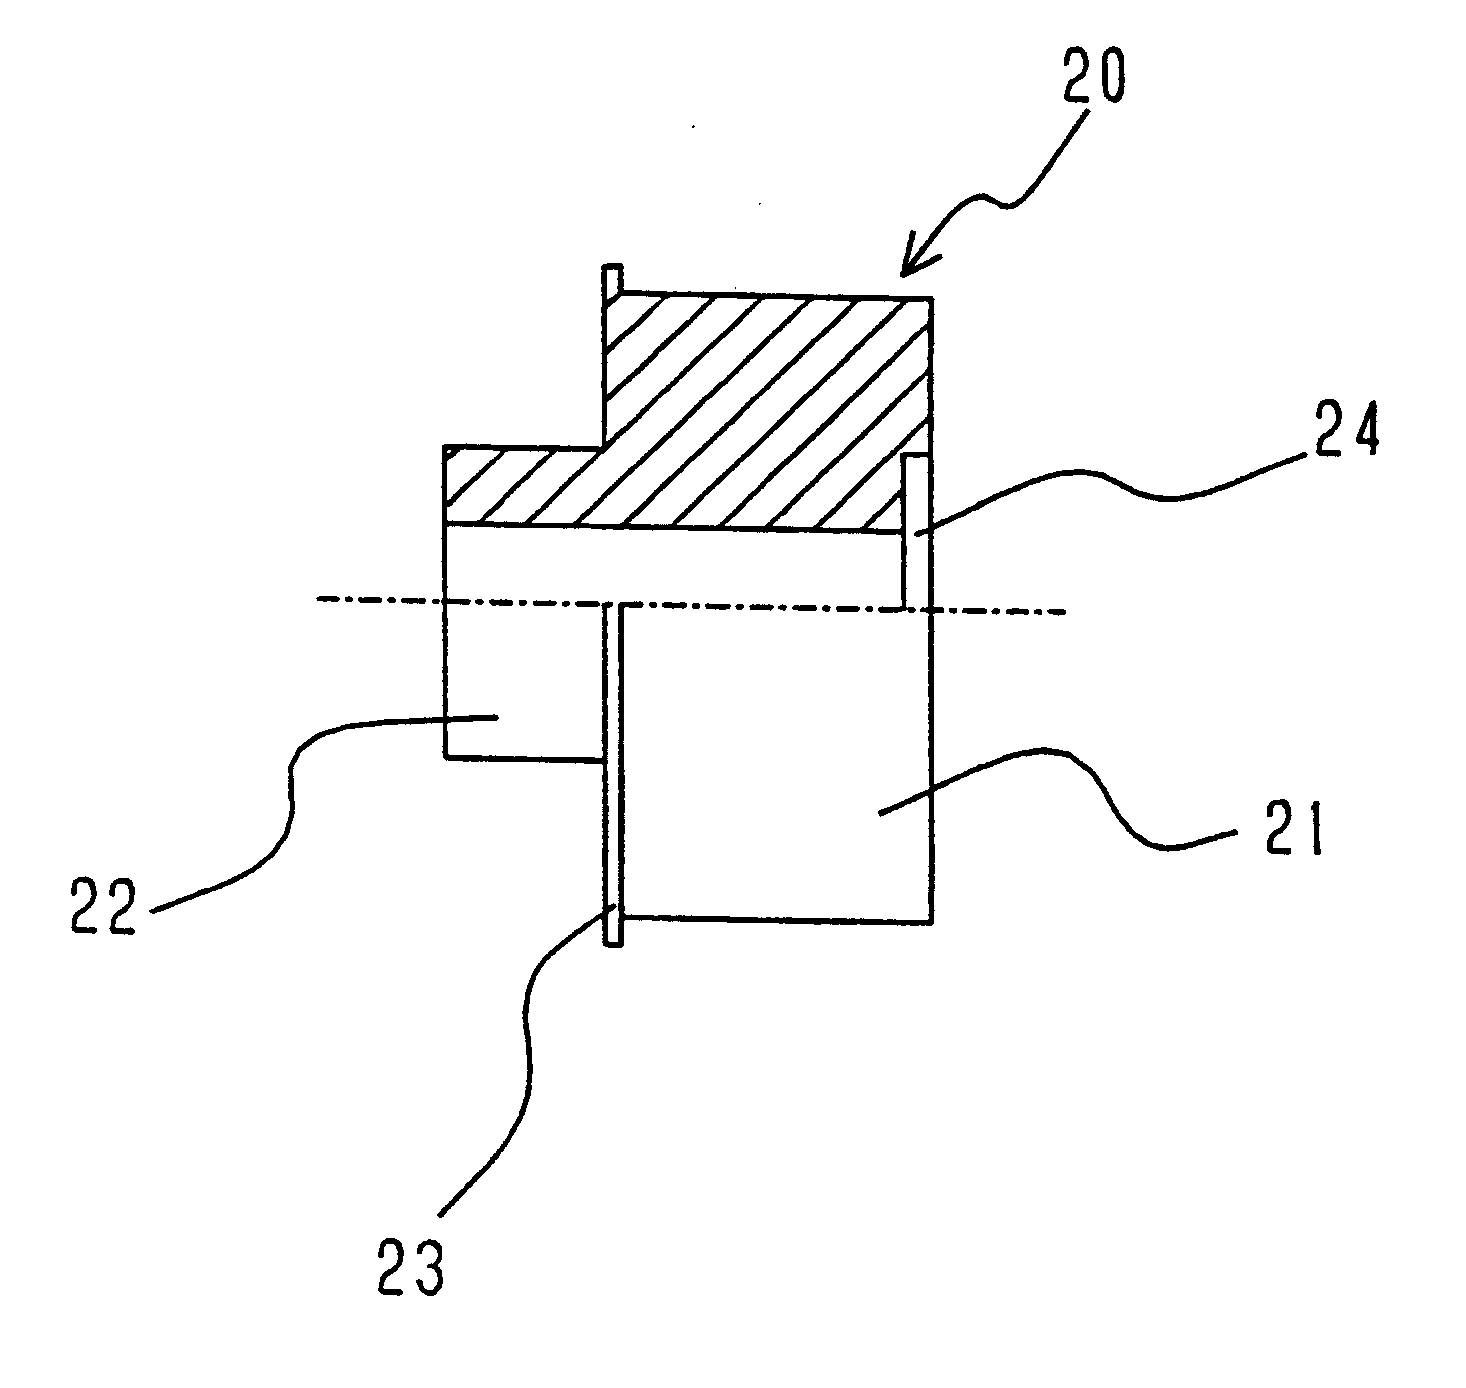 Take-up pulley in an image processor